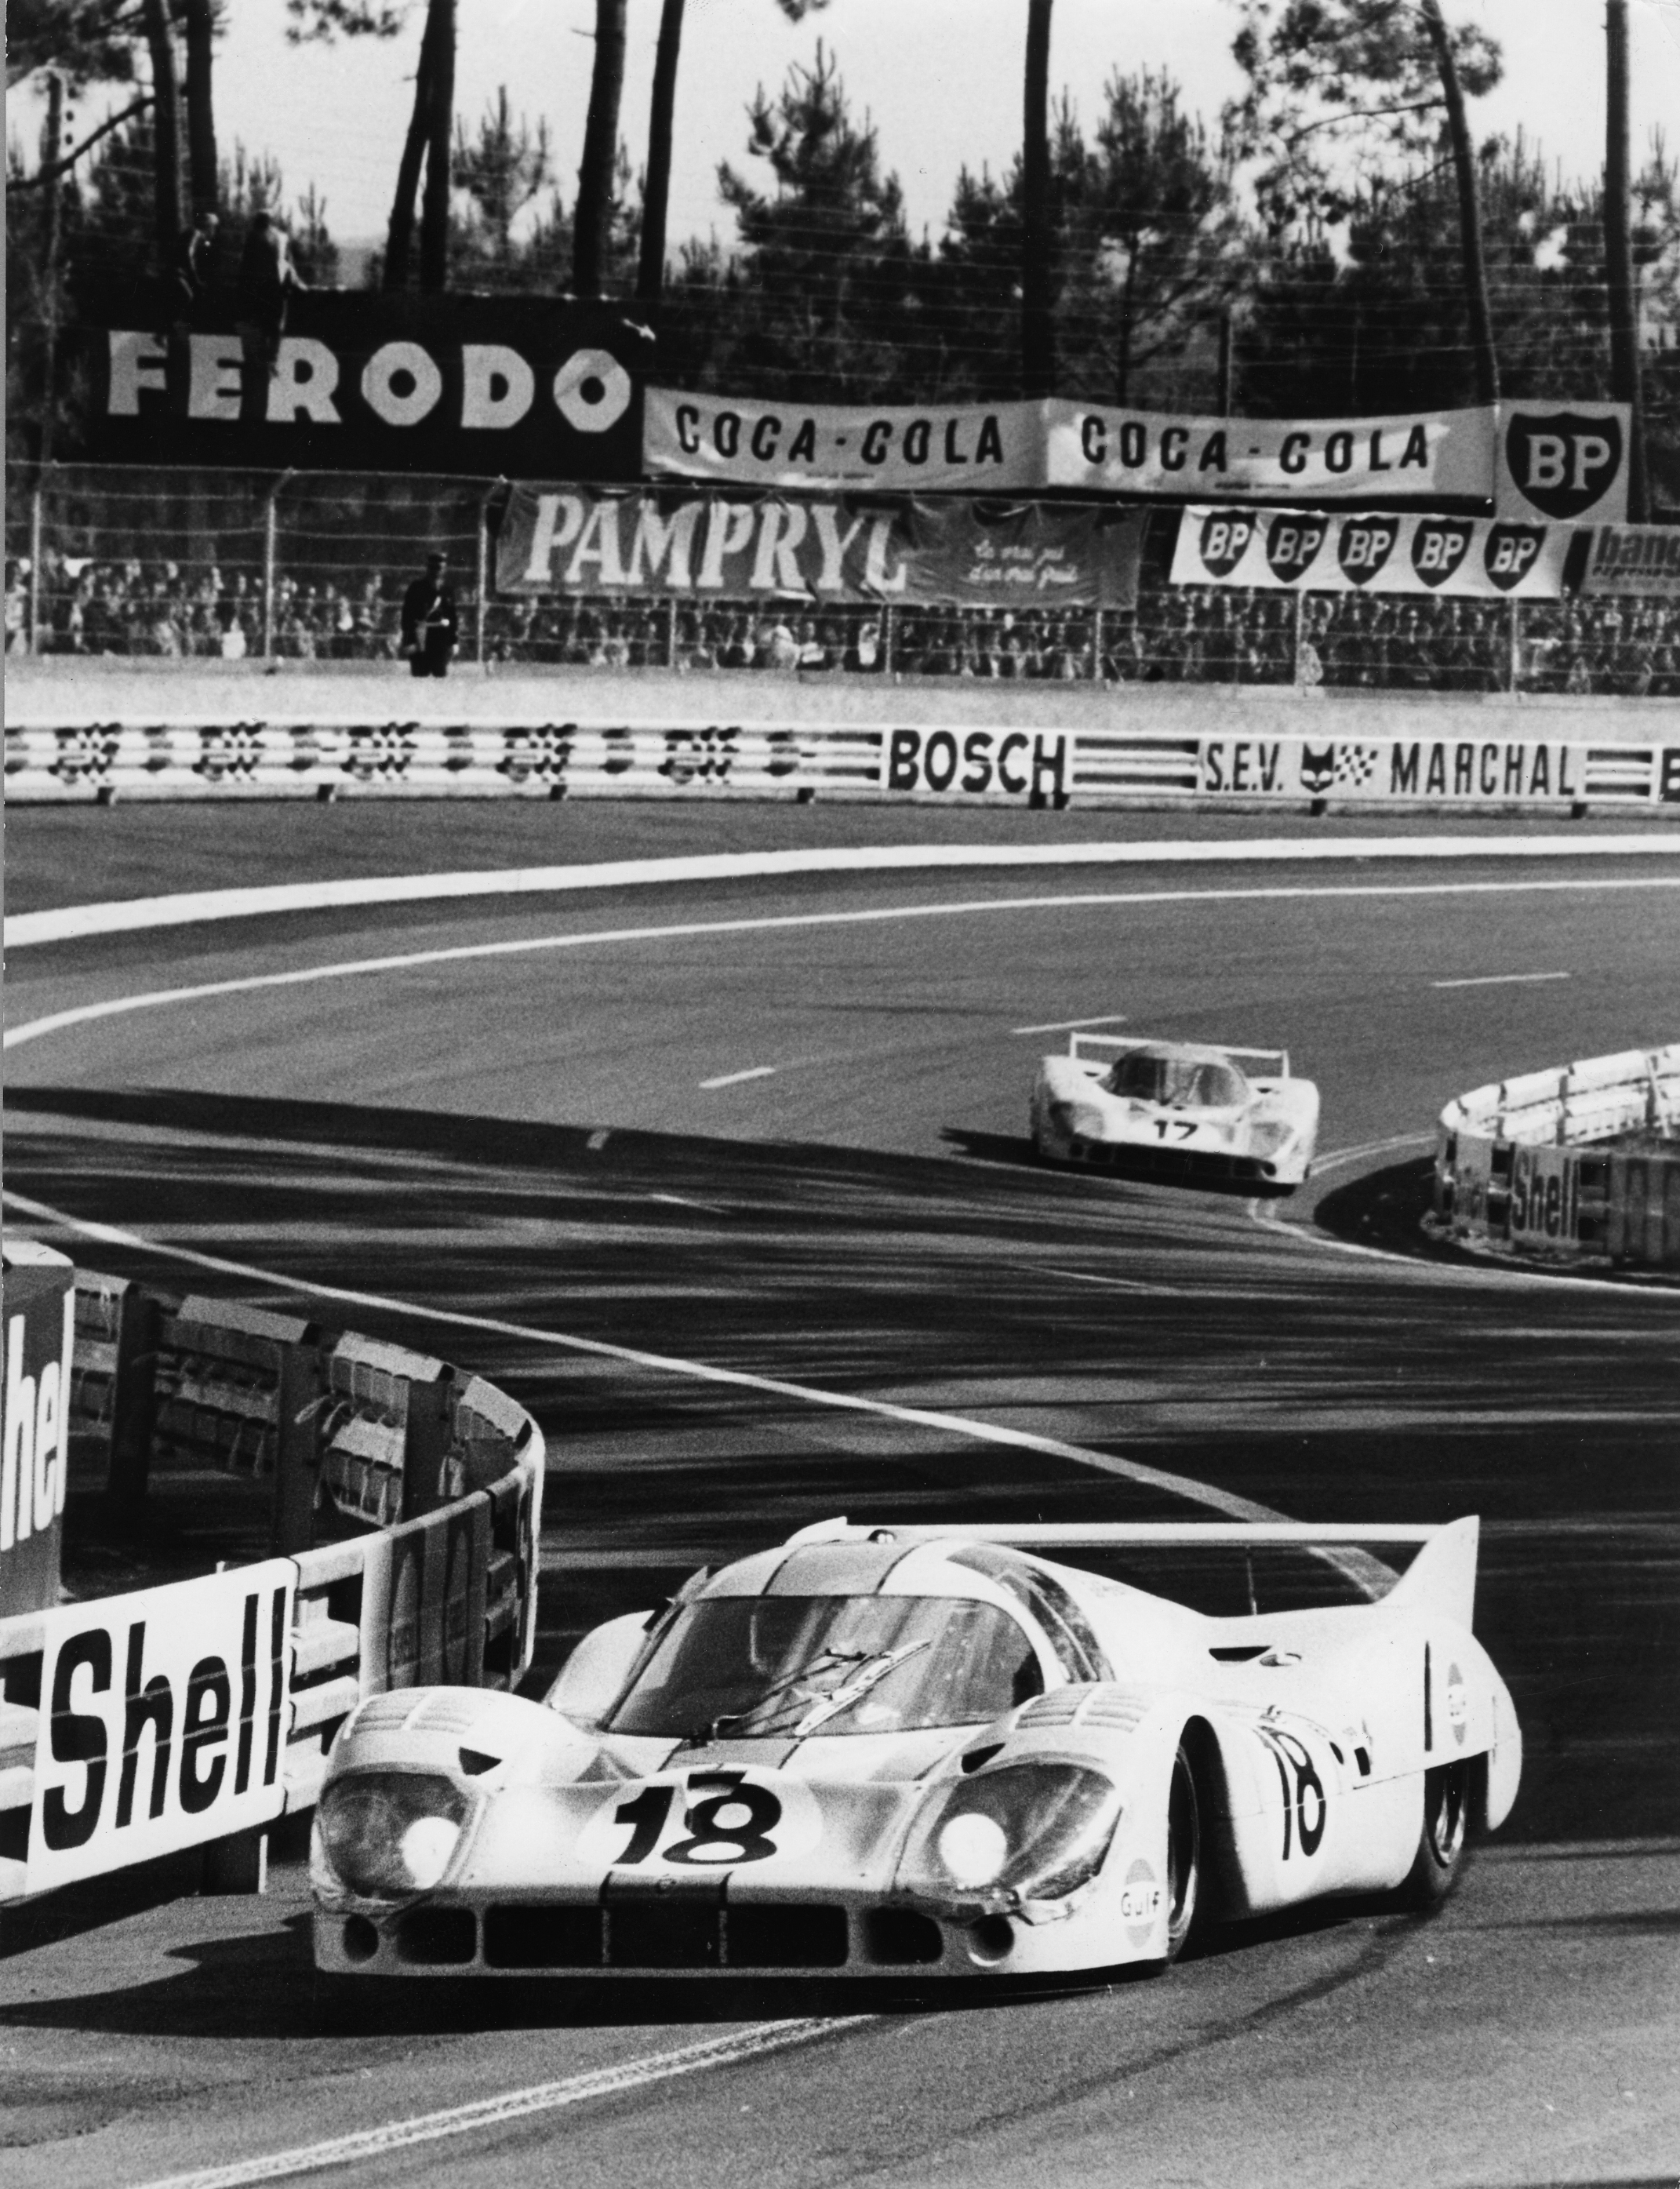 It’s never easy to pin down the reasons for success. Historical context plays a big part. The 24 Hours of Le Mans was extremely popular in the early 1970s. And the sight of such a formidable prototype ignited real passion.